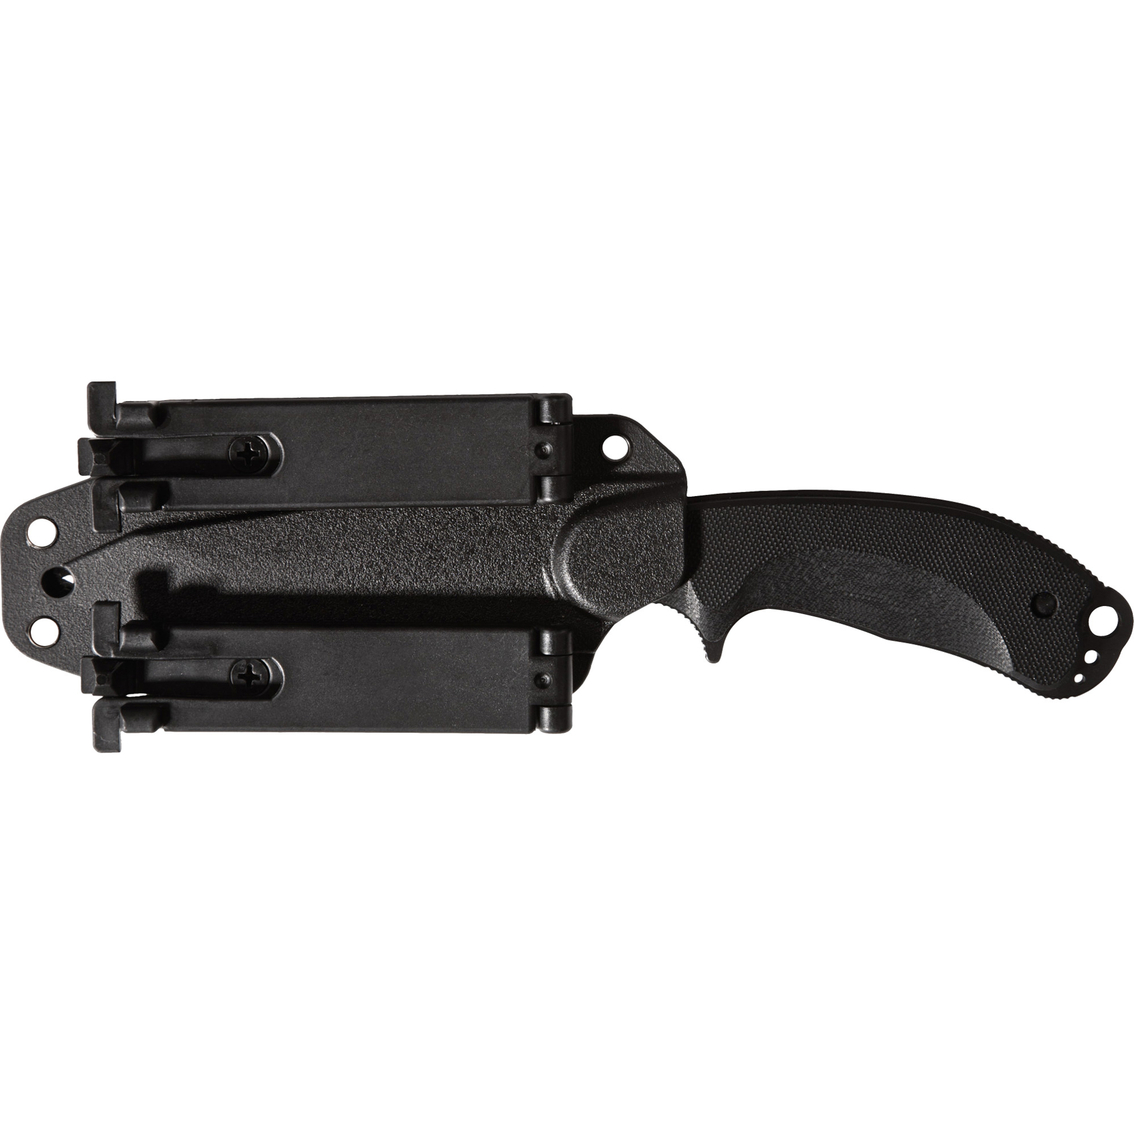 5.11 Tactical Tanto Surge Fixed Blade Knife - Image 4 of 4